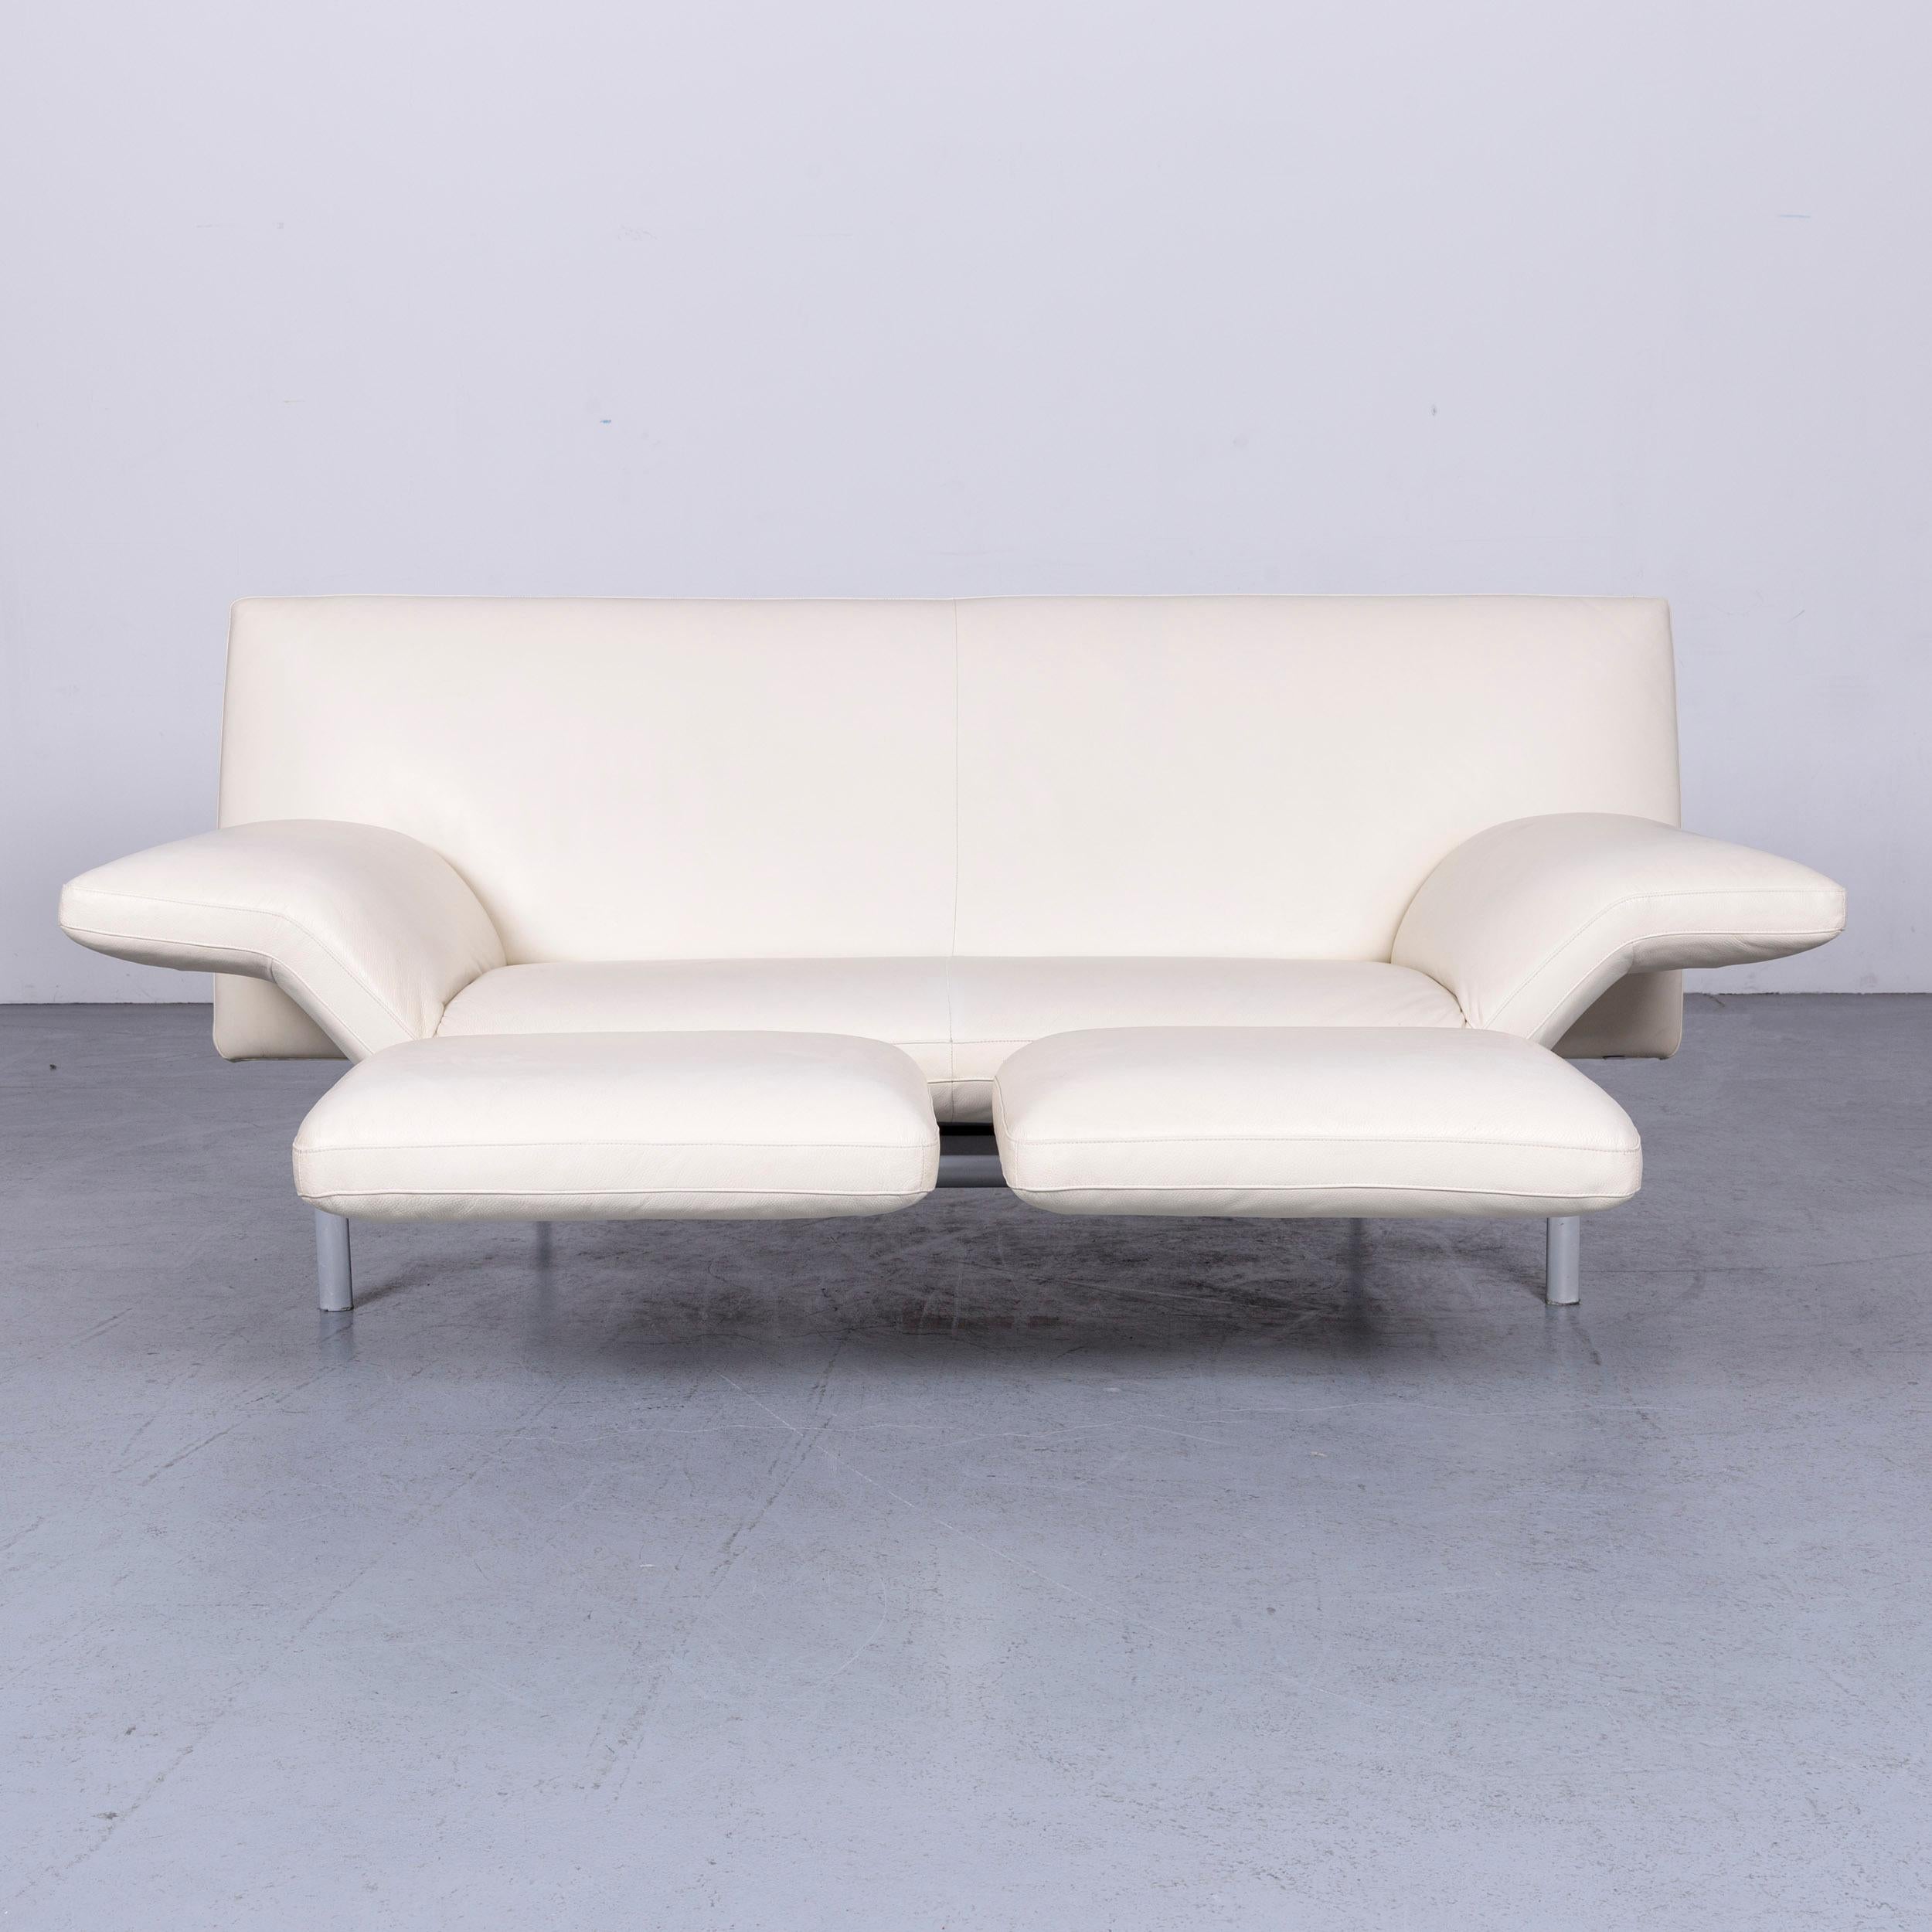 German Designo Flyer Designer Leather Sofa White Three-Seat Couch with Function